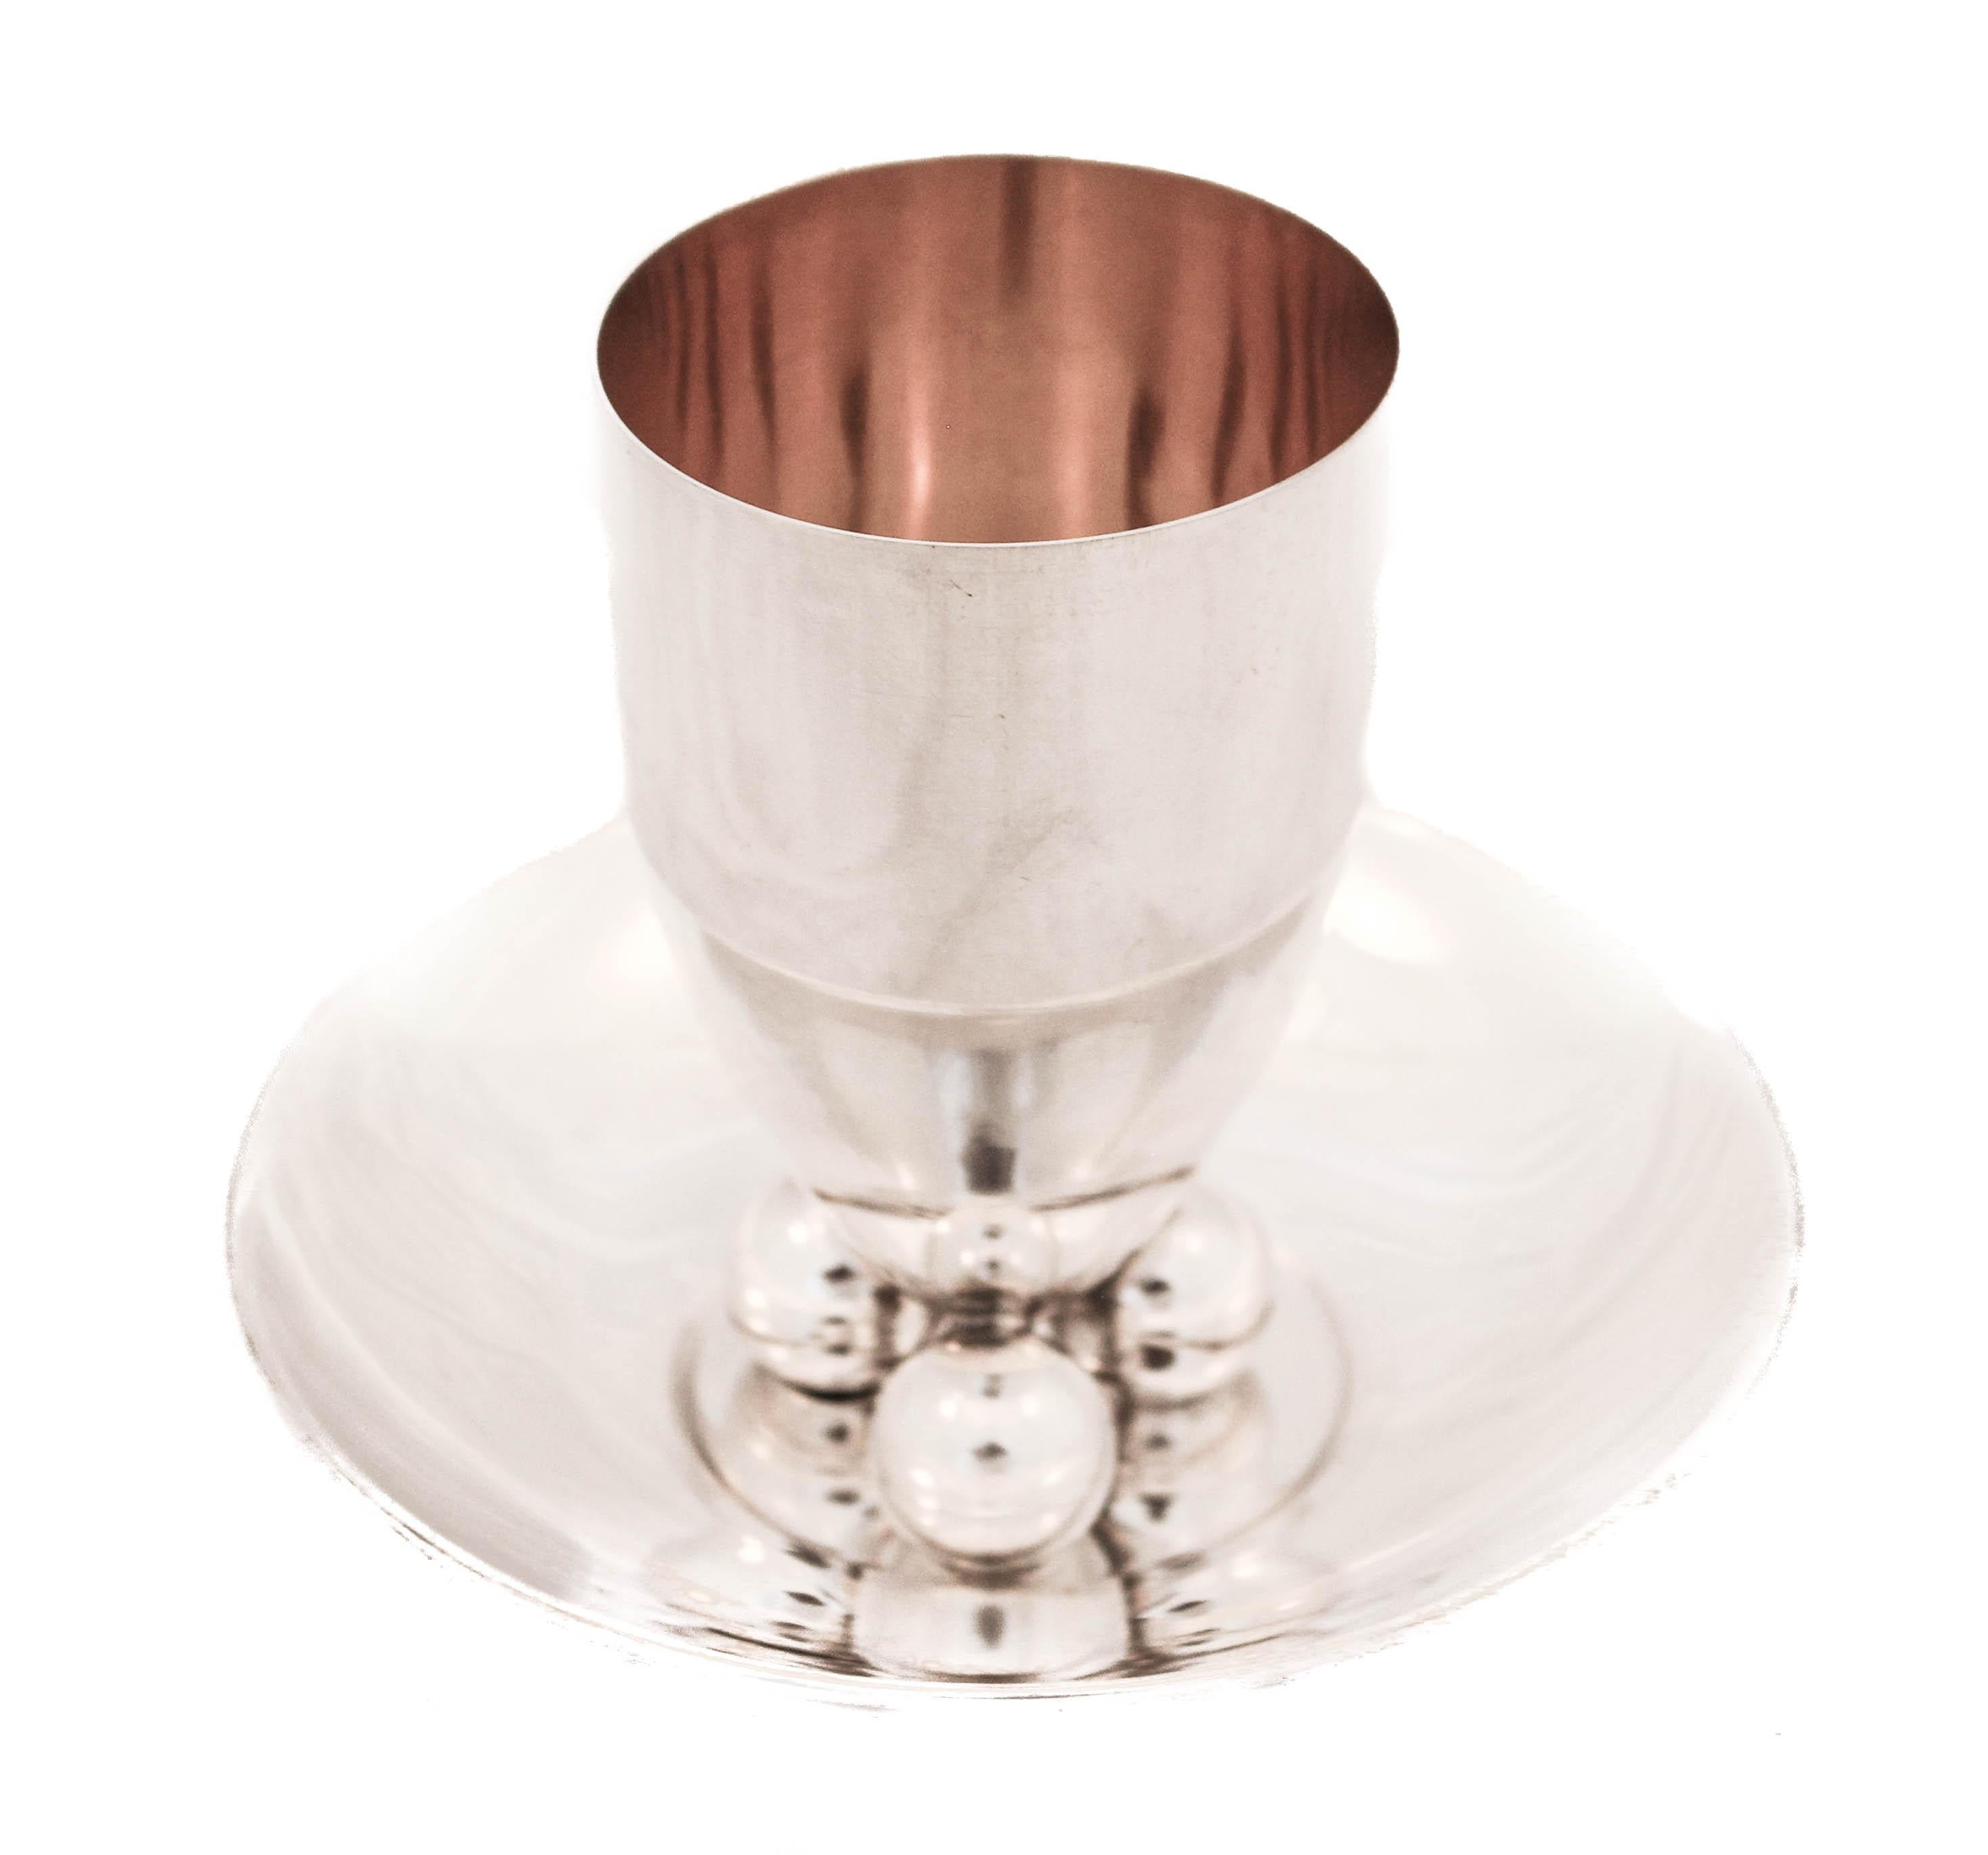 If you love modern, edgy sterling silver, keep reading. This sterling silver cup and plate have a modern “Jensenesque” quality. The cup is sleek and stands on three balls. The plate is flat in the center but curves up around the edge, also standing